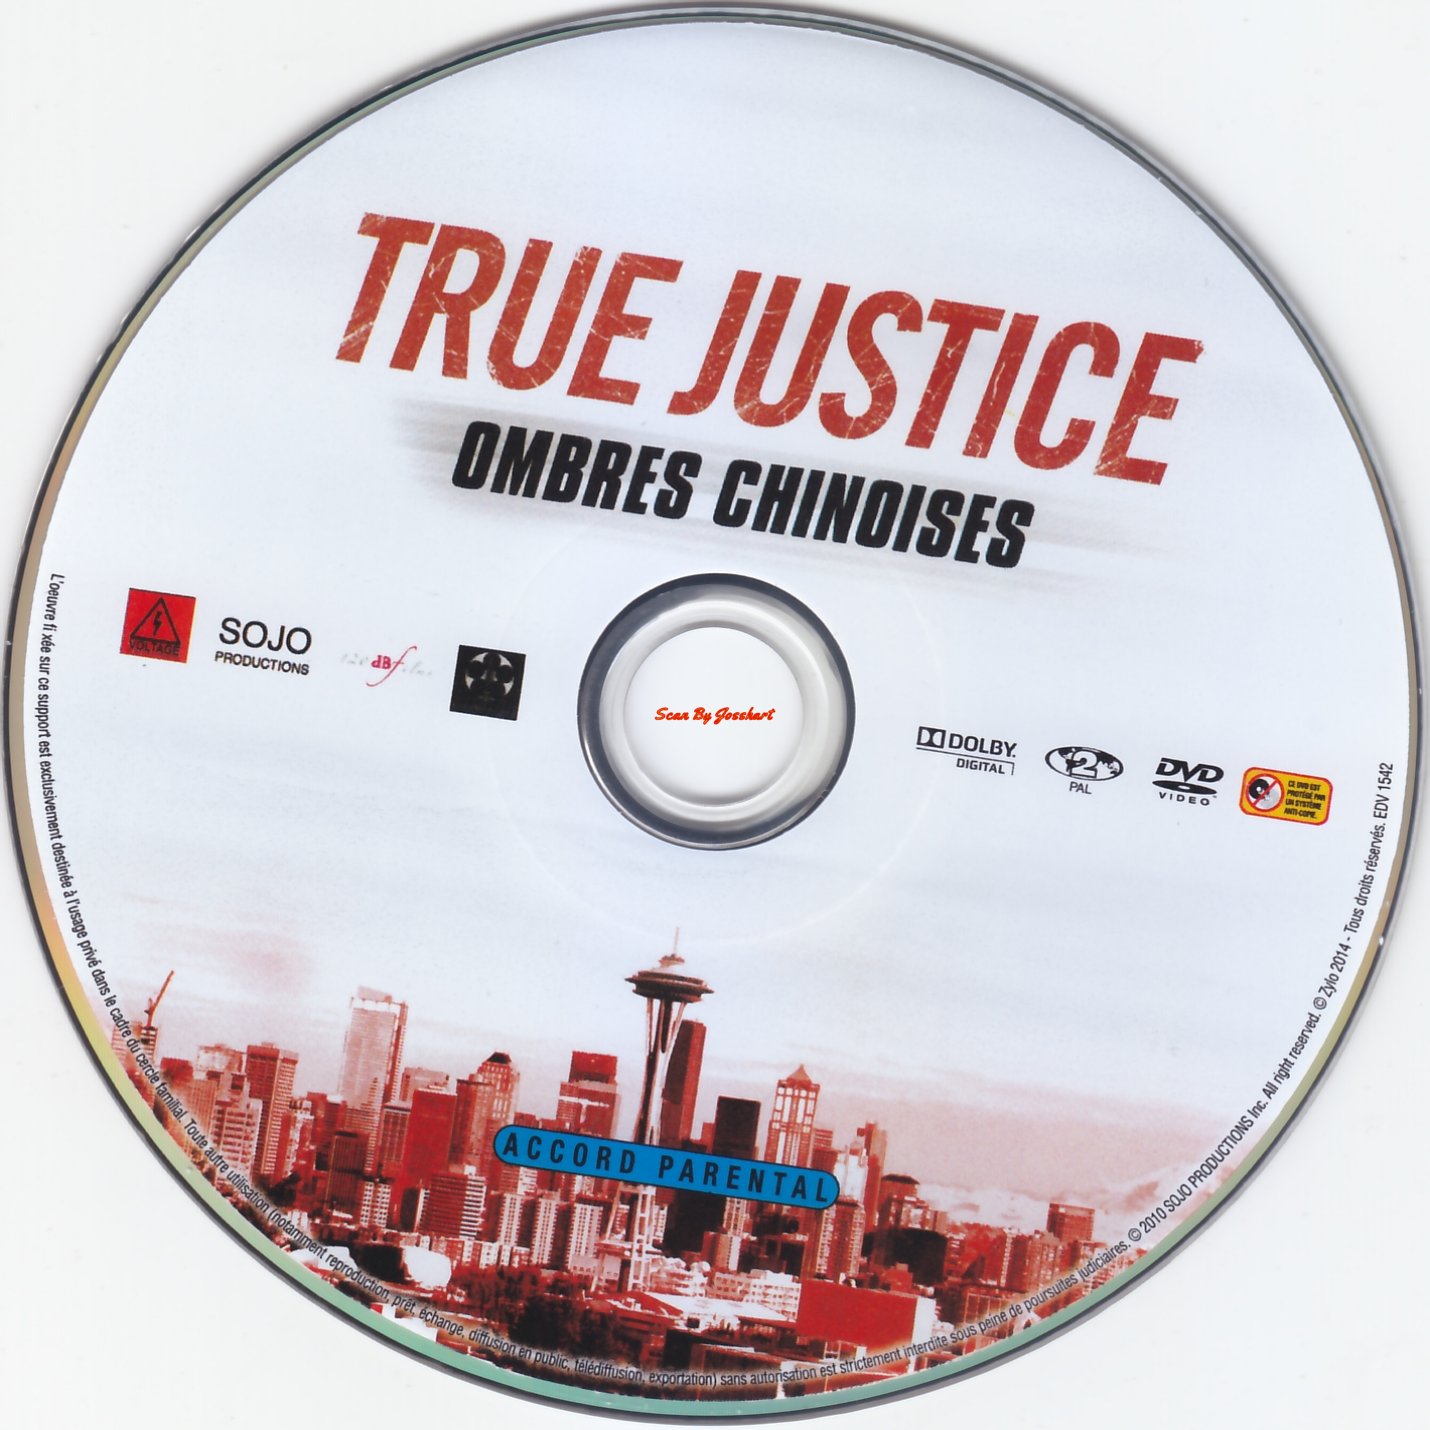 True Justice 2 Ombres Chinoises